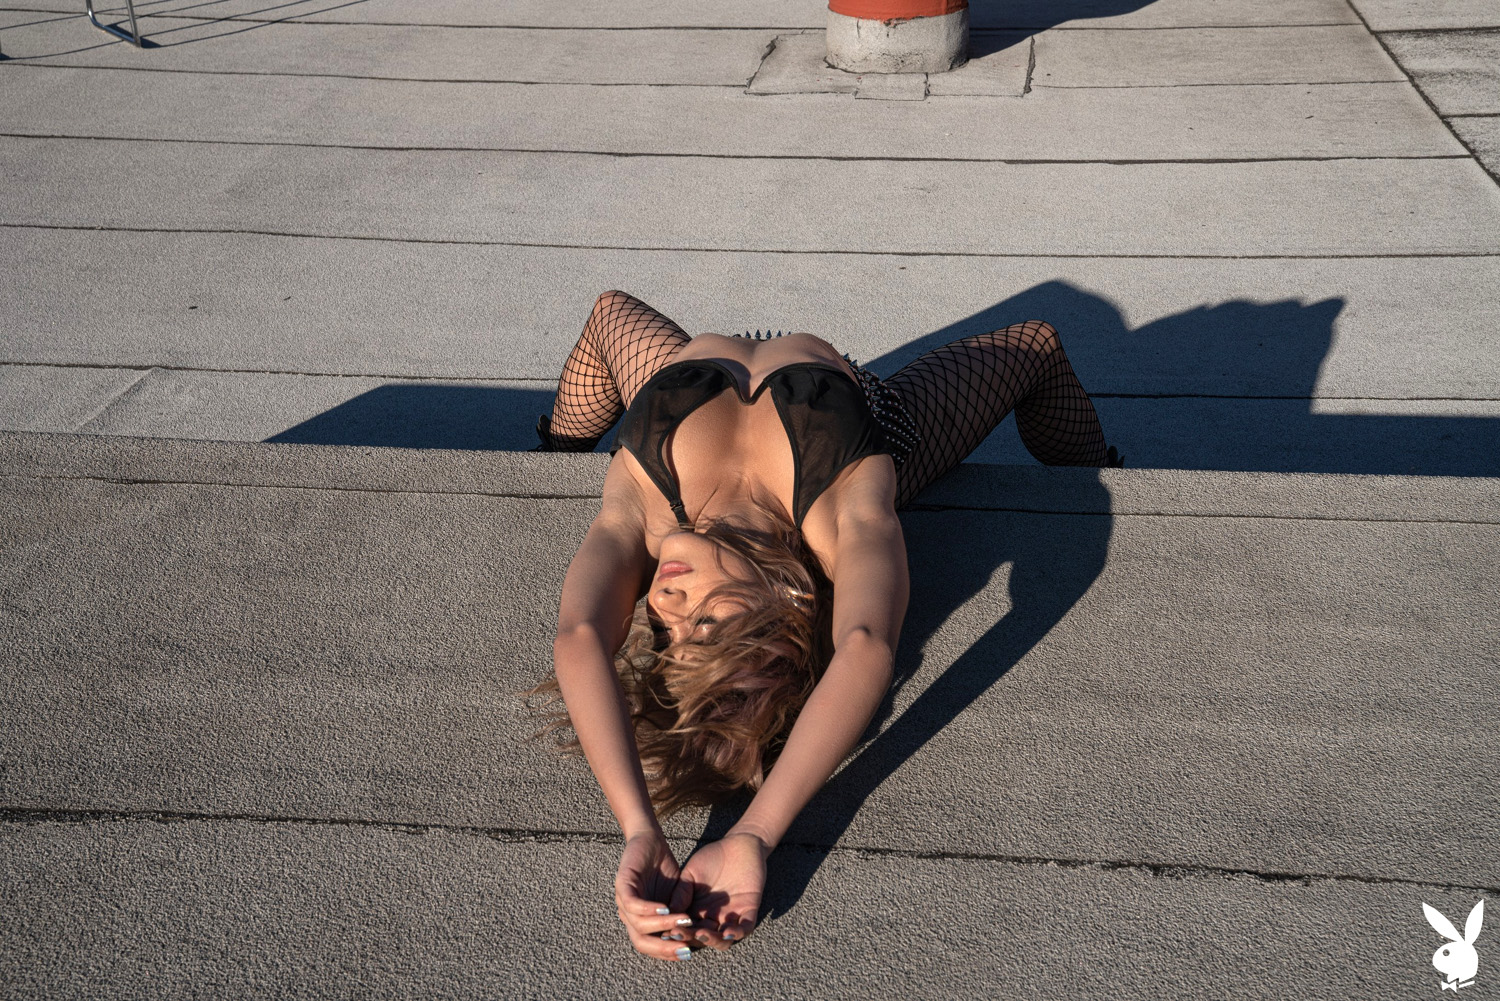 Mia Valentine exposes her spectacular curves on the office building's rooftop